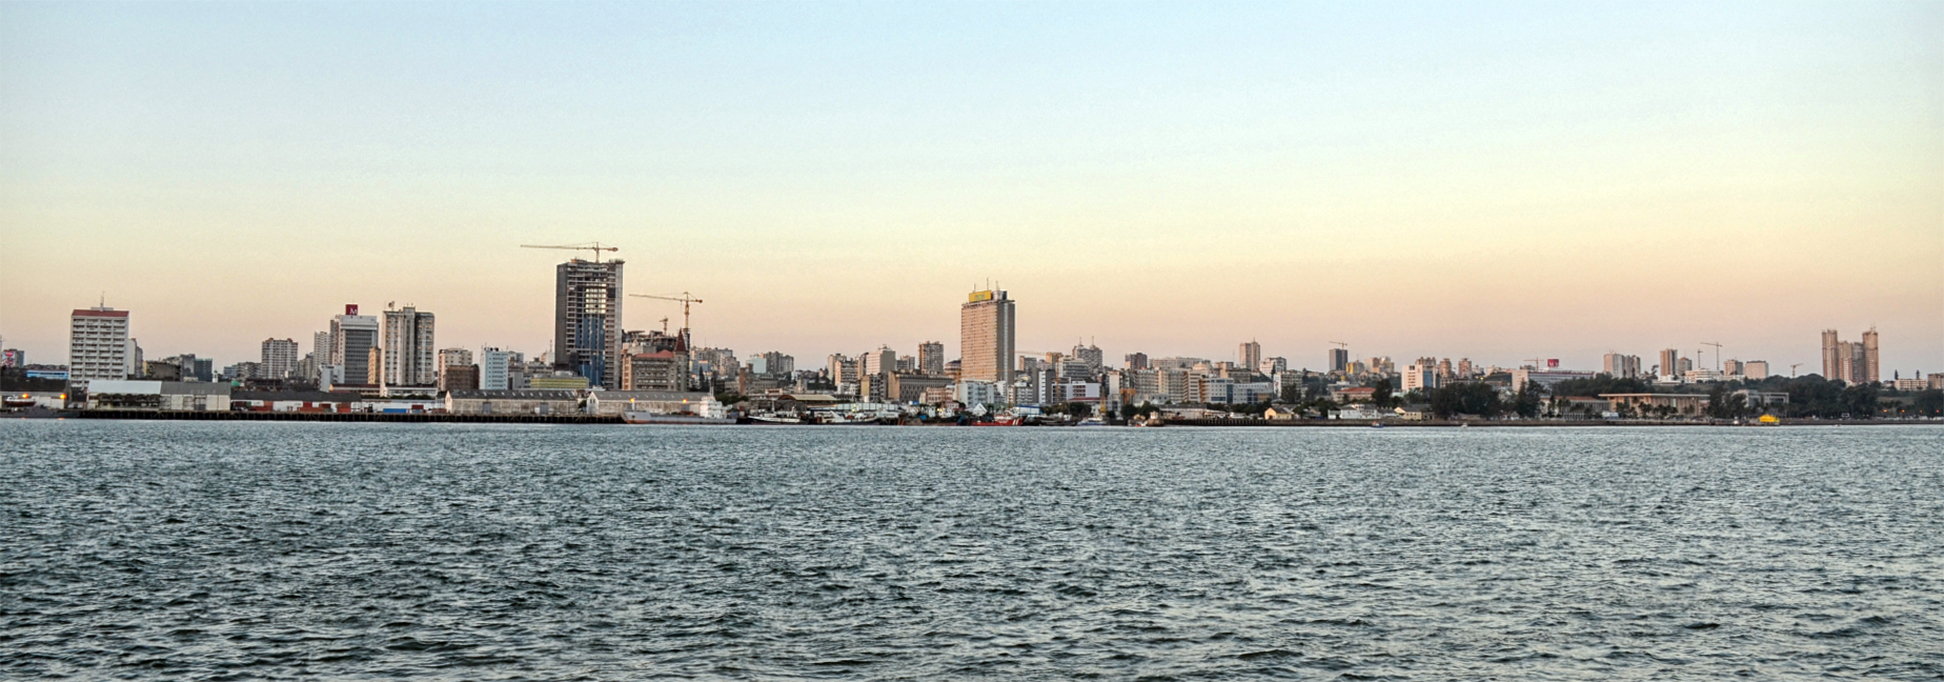 A view of Maputo from the seaside